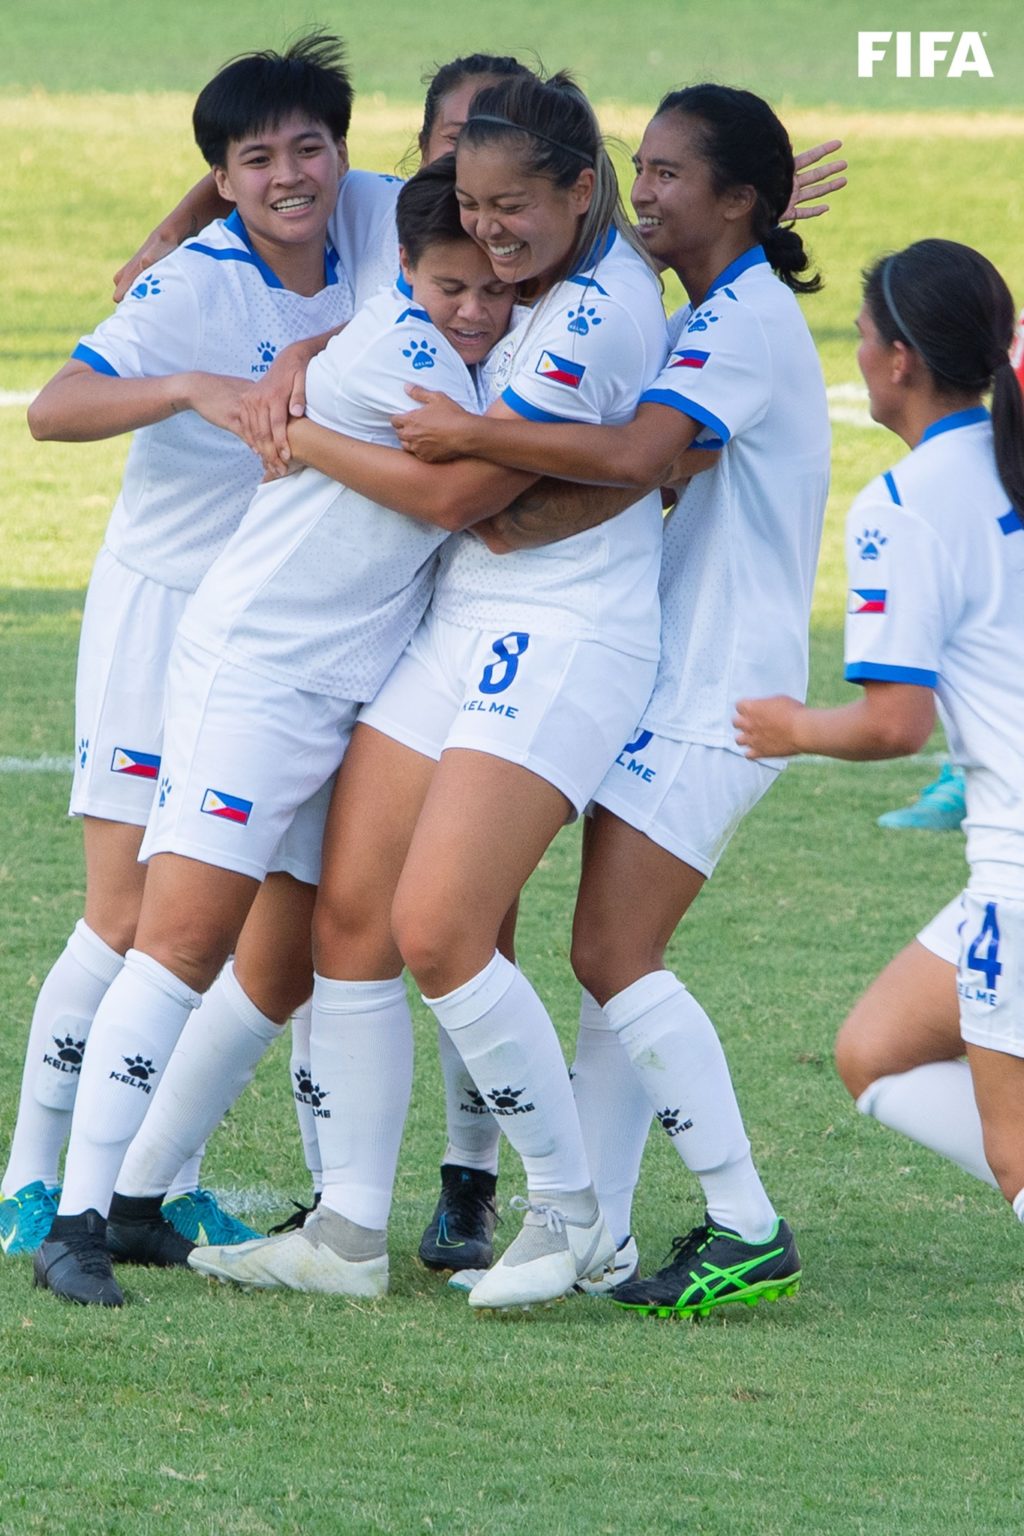 The Philippine Malditas celebrate after scoring a goal during their match versus Nepal in the ongoing AFC Asian Cup Qualifiers in Tashkent, Uzbekistan. | Photo from FIFA